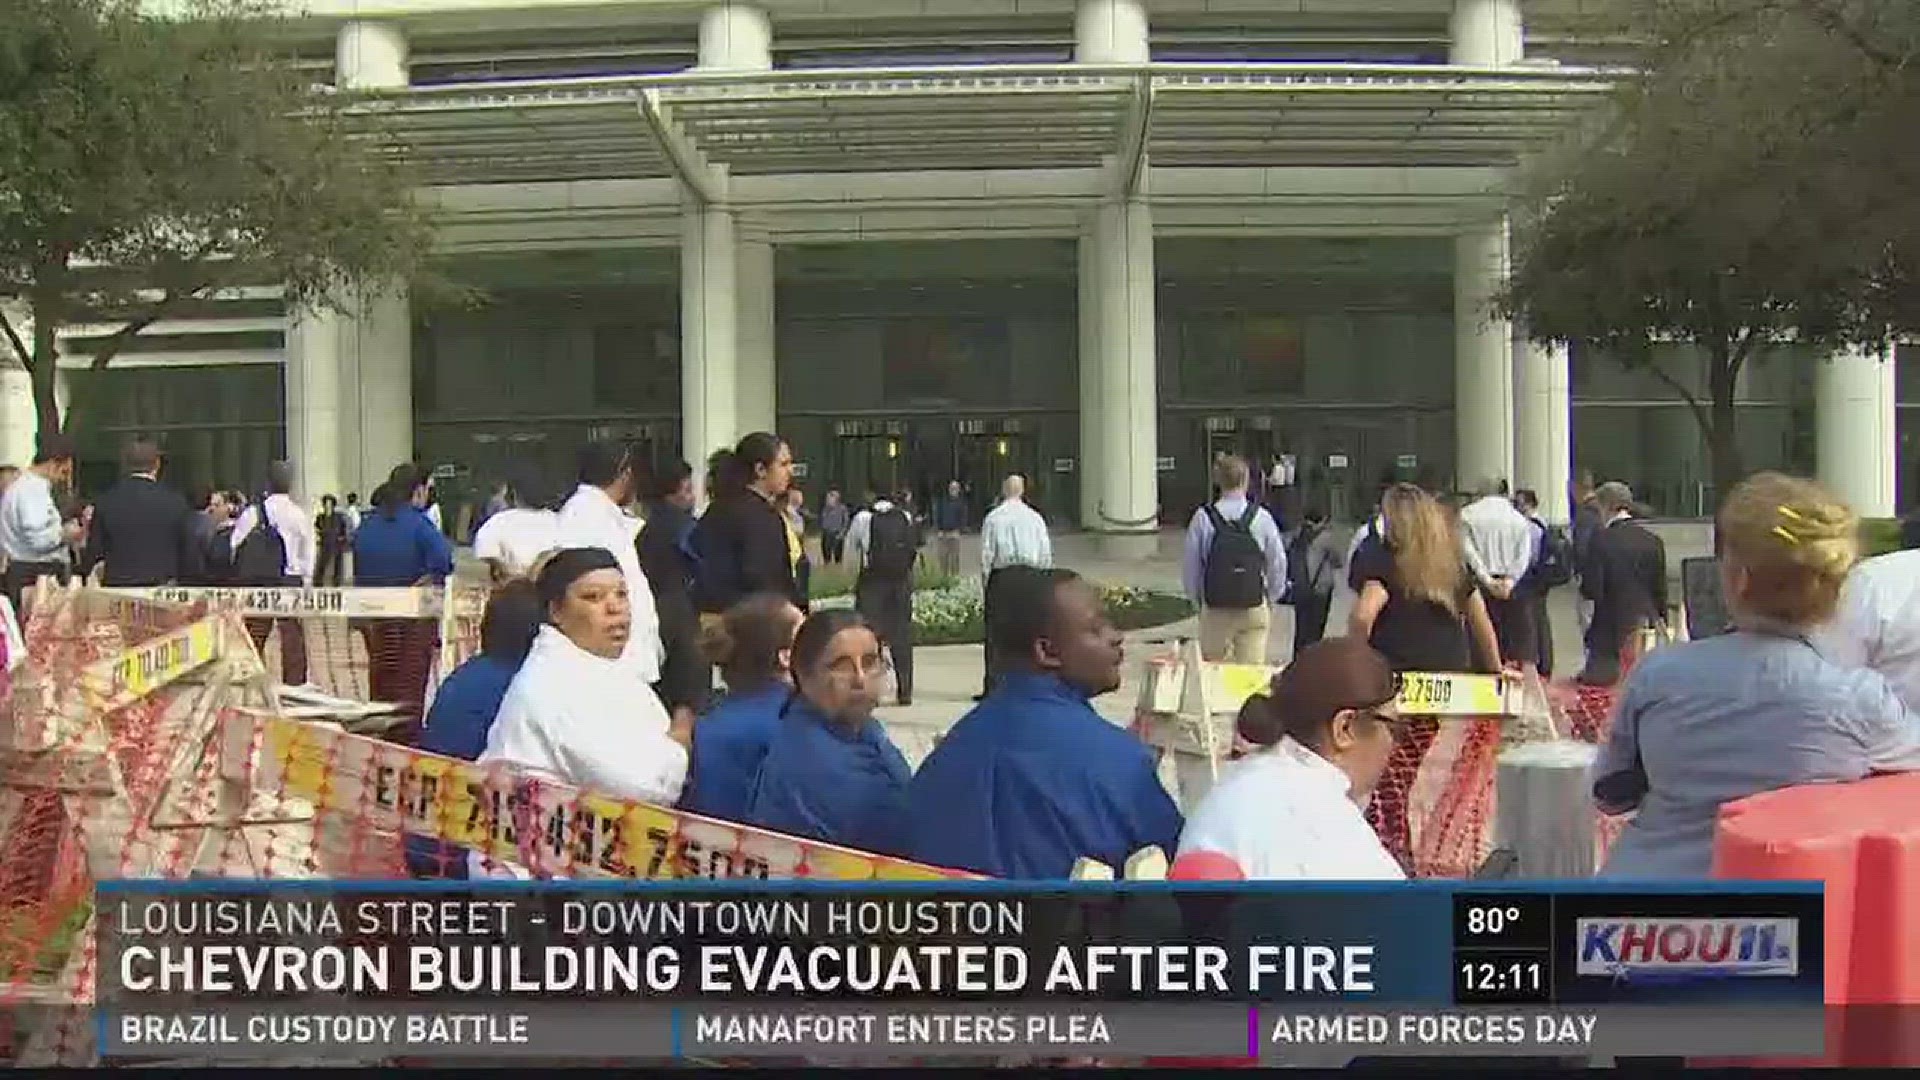 The Chevron Building downtown was evacuated due to a fire in the basement Wednesday morning.